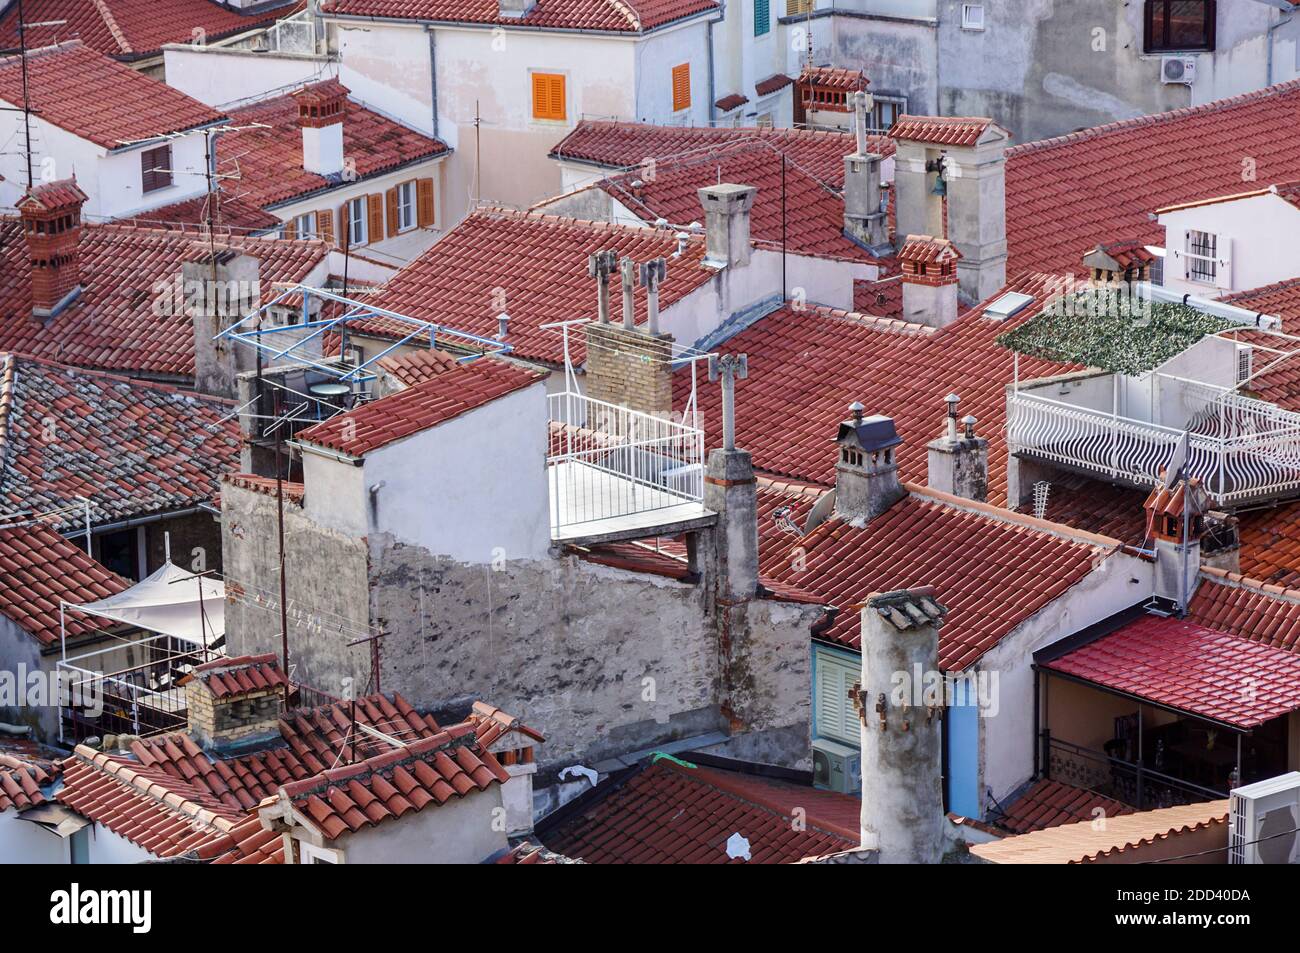 Roofs . View of the tiled roof tops and scenic skyline of the Old Town of Dubrovnik, taken from on top of its surrounding wall, Stock Photo